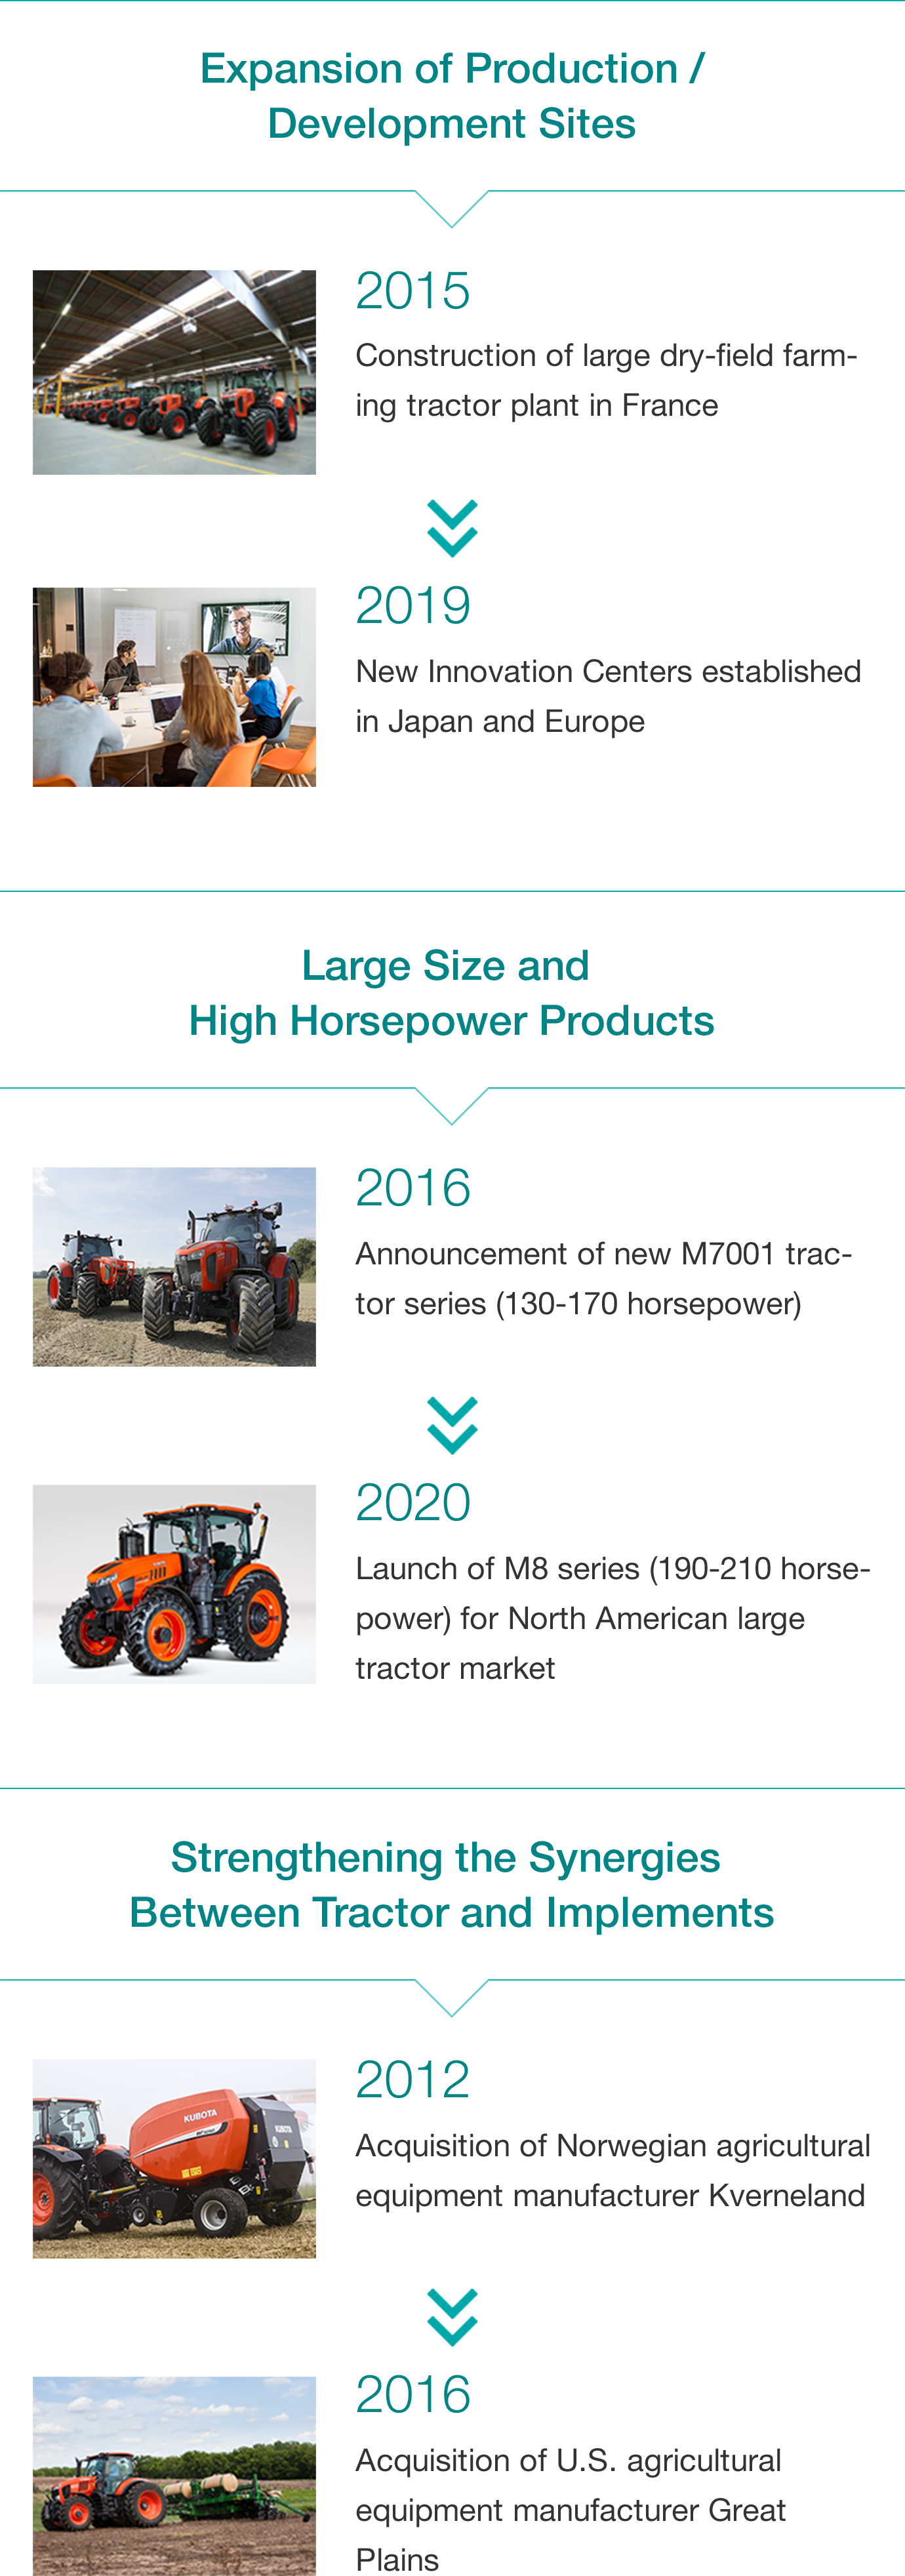 Expansion of Production/Development Sites: 2015 - Construction of large dry-field farming tractor plant in France, 2019 - New Innovation Centers established in Japan and Europe, Large Size and High Horsepower Products: 2016 - Announcement of new M7001 tractor series (130-170 horsepower), 2020 - Launch of M8 series (190-210 horsepower) for North American large tractor market, Synergies Between Tractor and Implements: 2012 - Acquisition of Norwegian agricultural equipment manufacturer Kverneland, 2016 - Acquisition of U.S. agricultural equipment manufacturer Great Plains